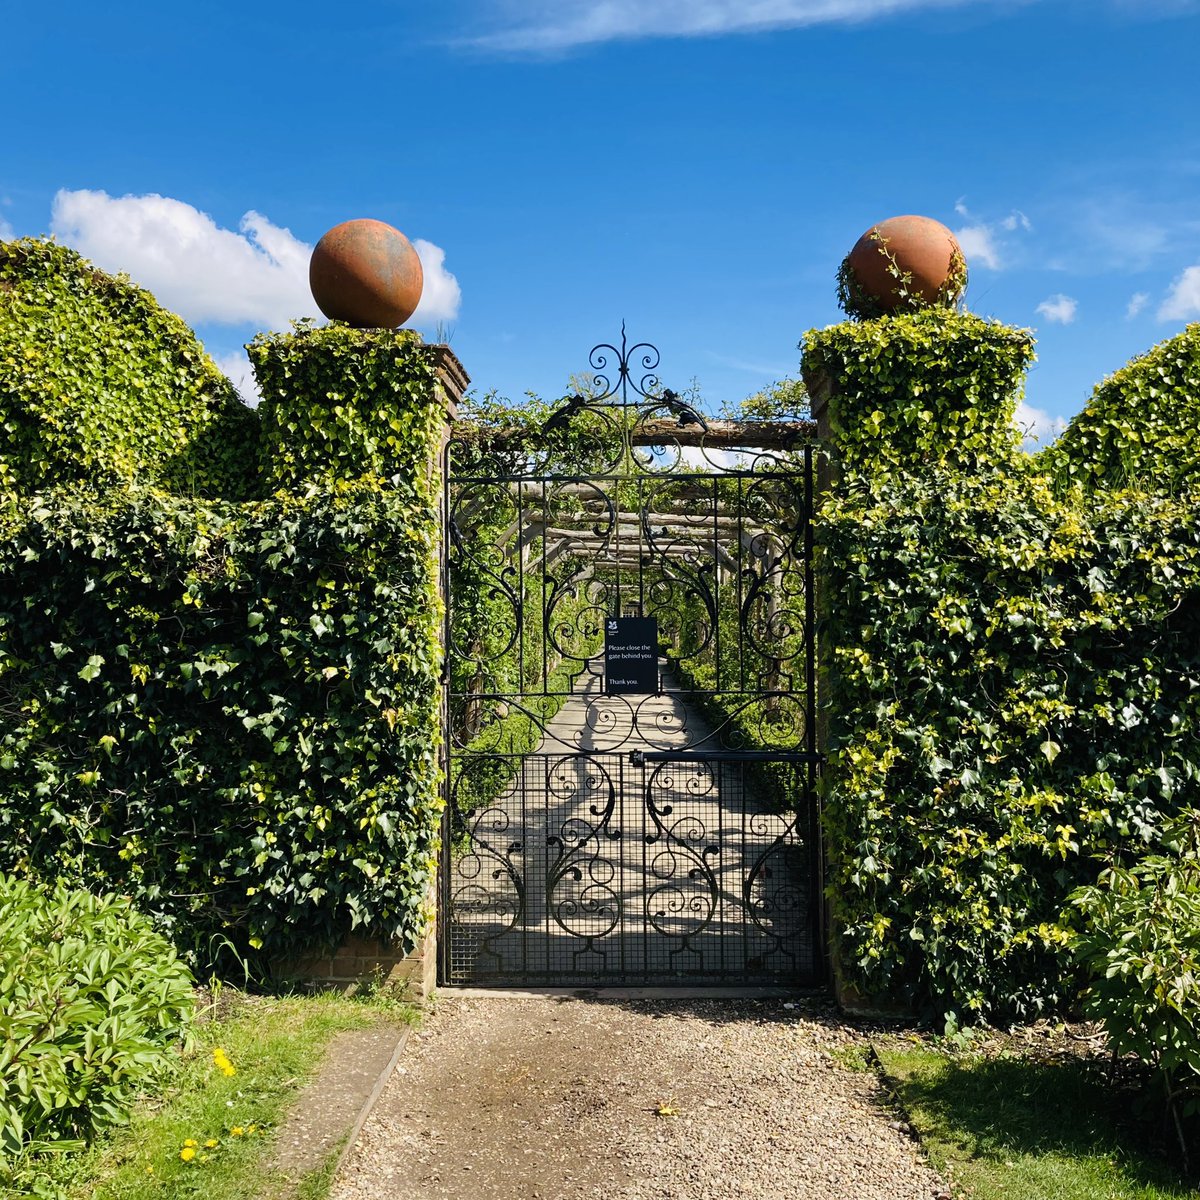 Ok, so technically a gate not a door, but a fine contender nonetheless for the #AdoorableThursday / #IronworkThursday social media meeting point (it's @PolesdenLaceyNT since you ask)